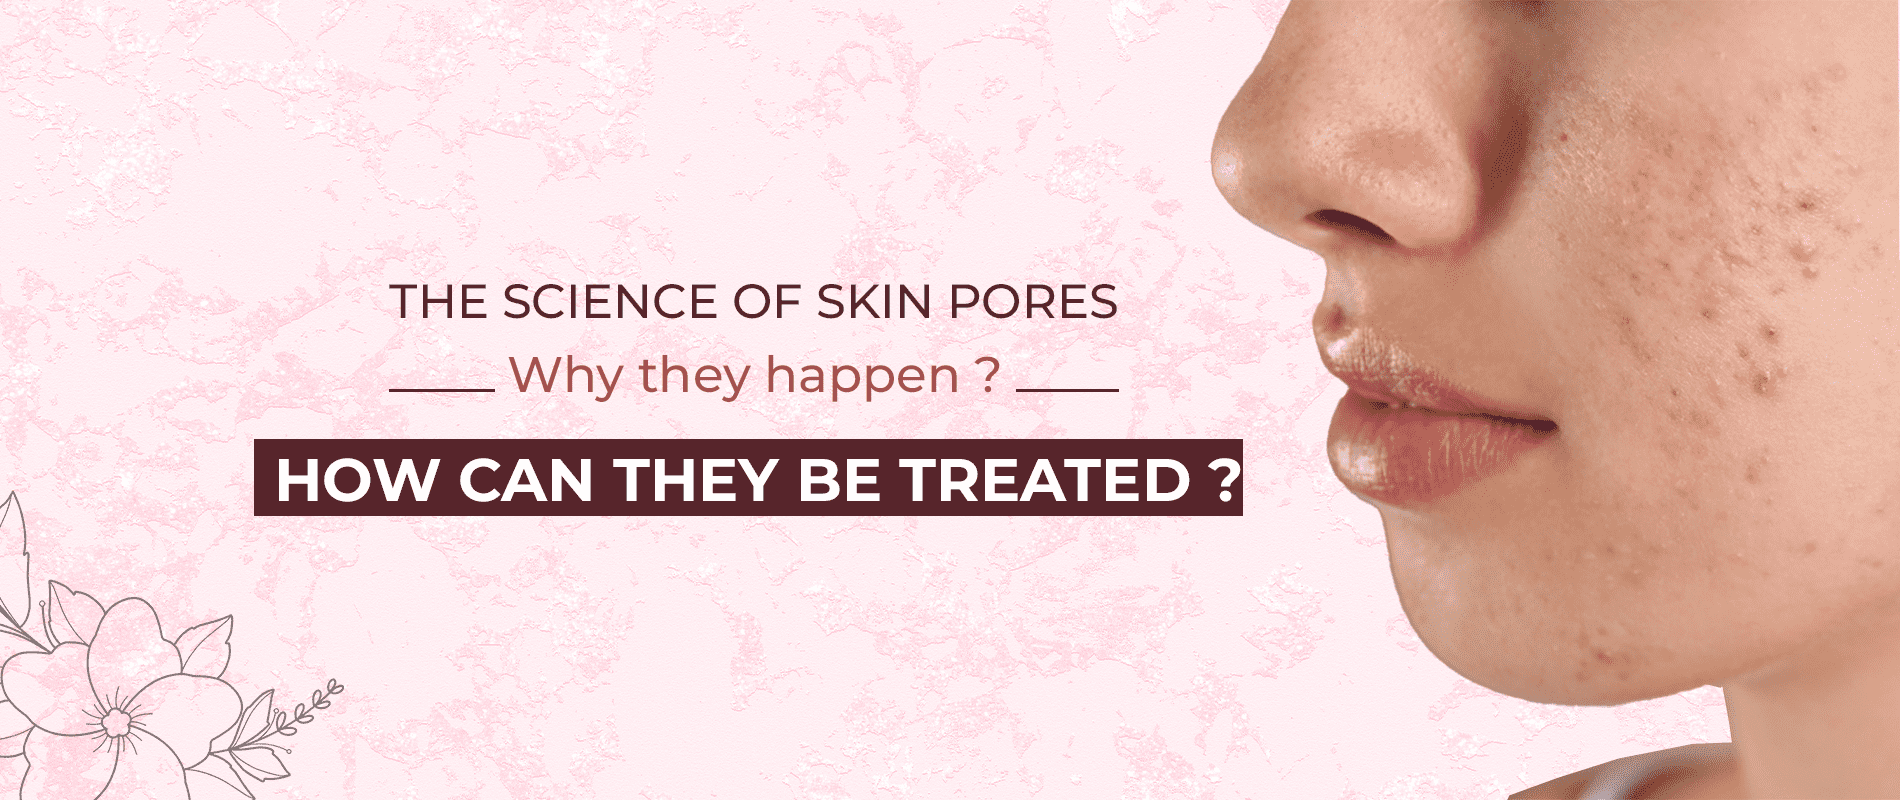 The Science of Skin Pores: Why they happen & how can they be treated?